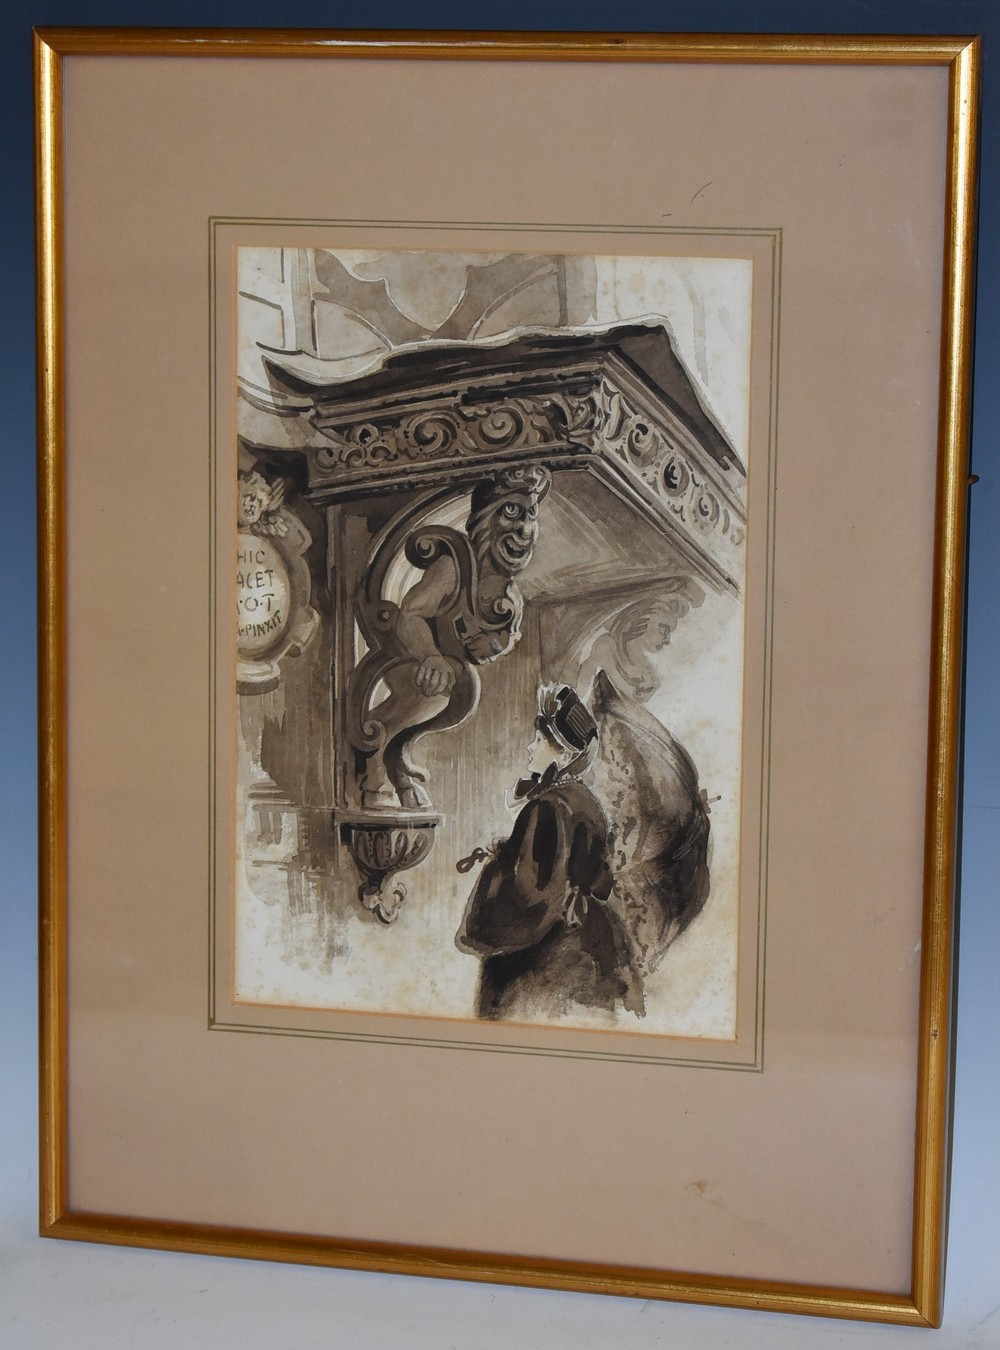 English School, late 19th/early 20th century, A Grisaille Study of a Lady, watercolour, 27.